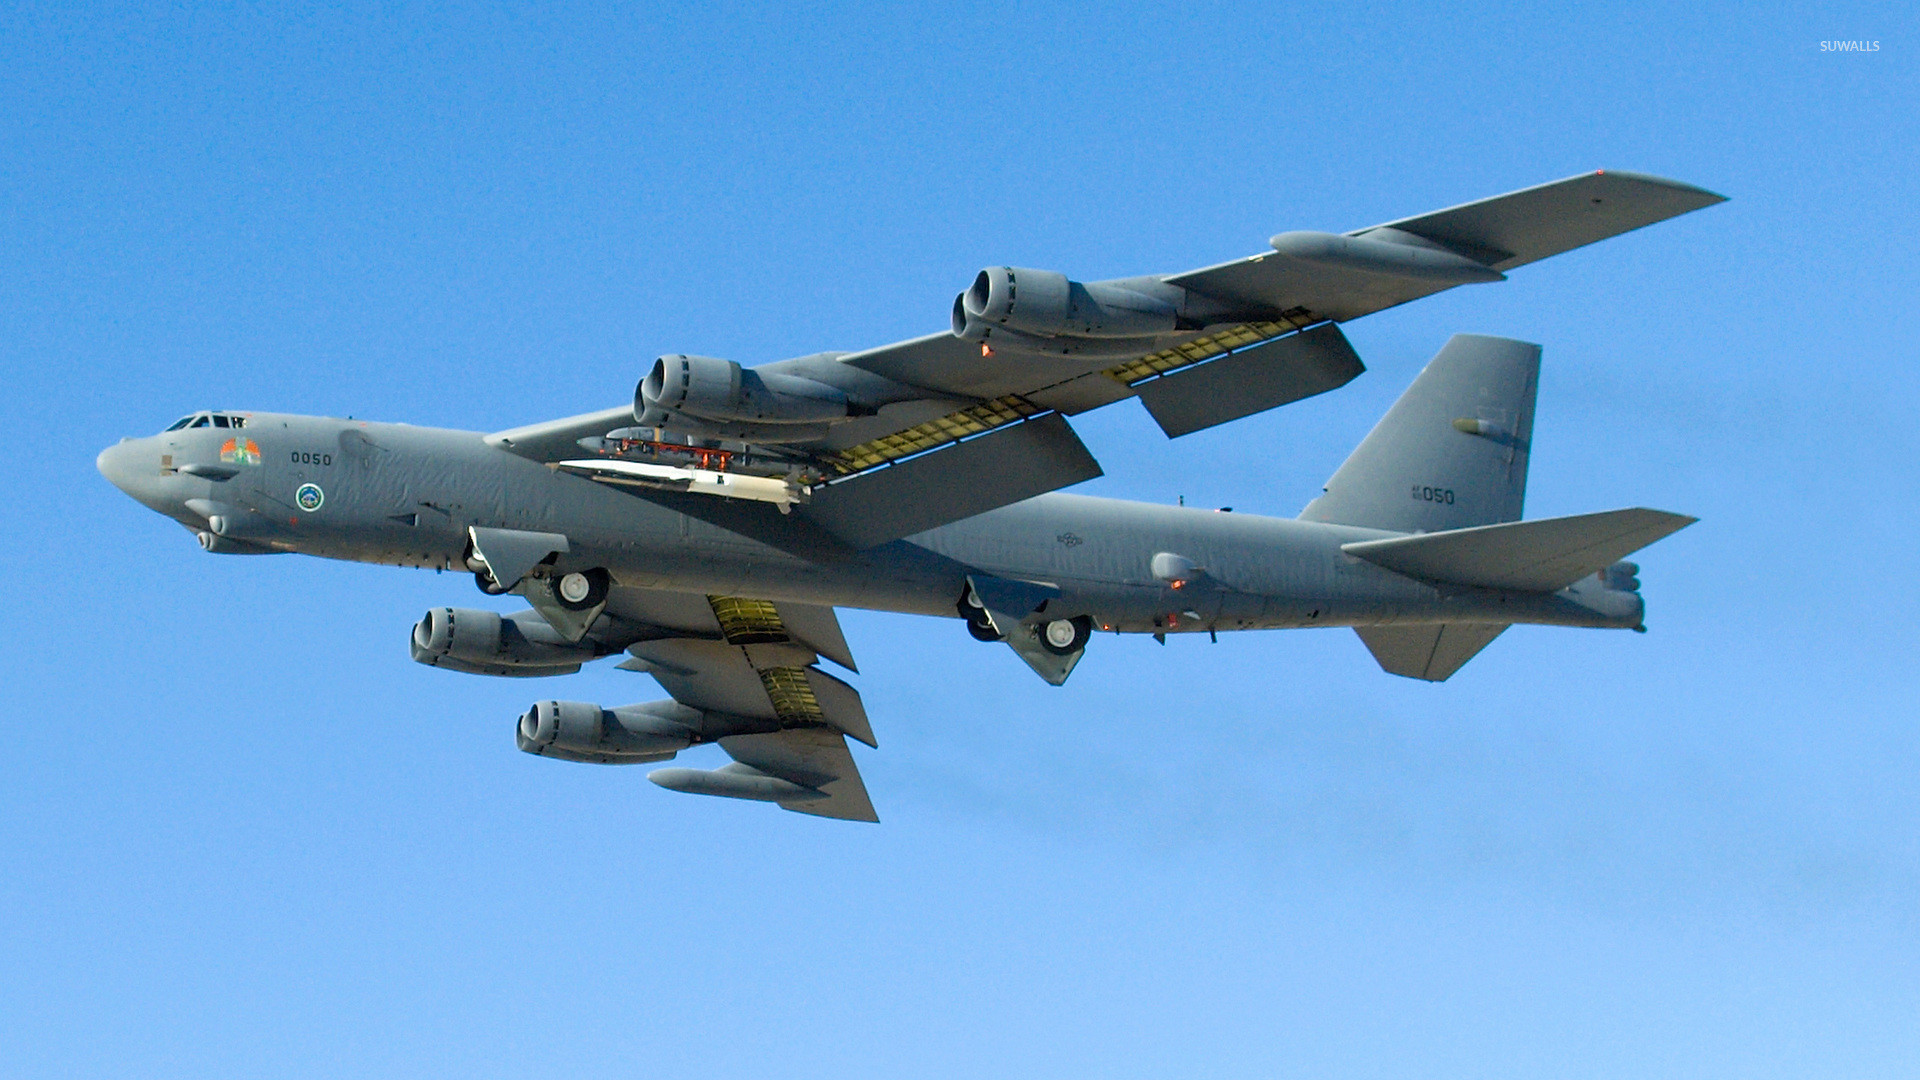 1920x1080 Boeing B-52 Stratofortress wallpaper - Aircraft wallpapers - #6156